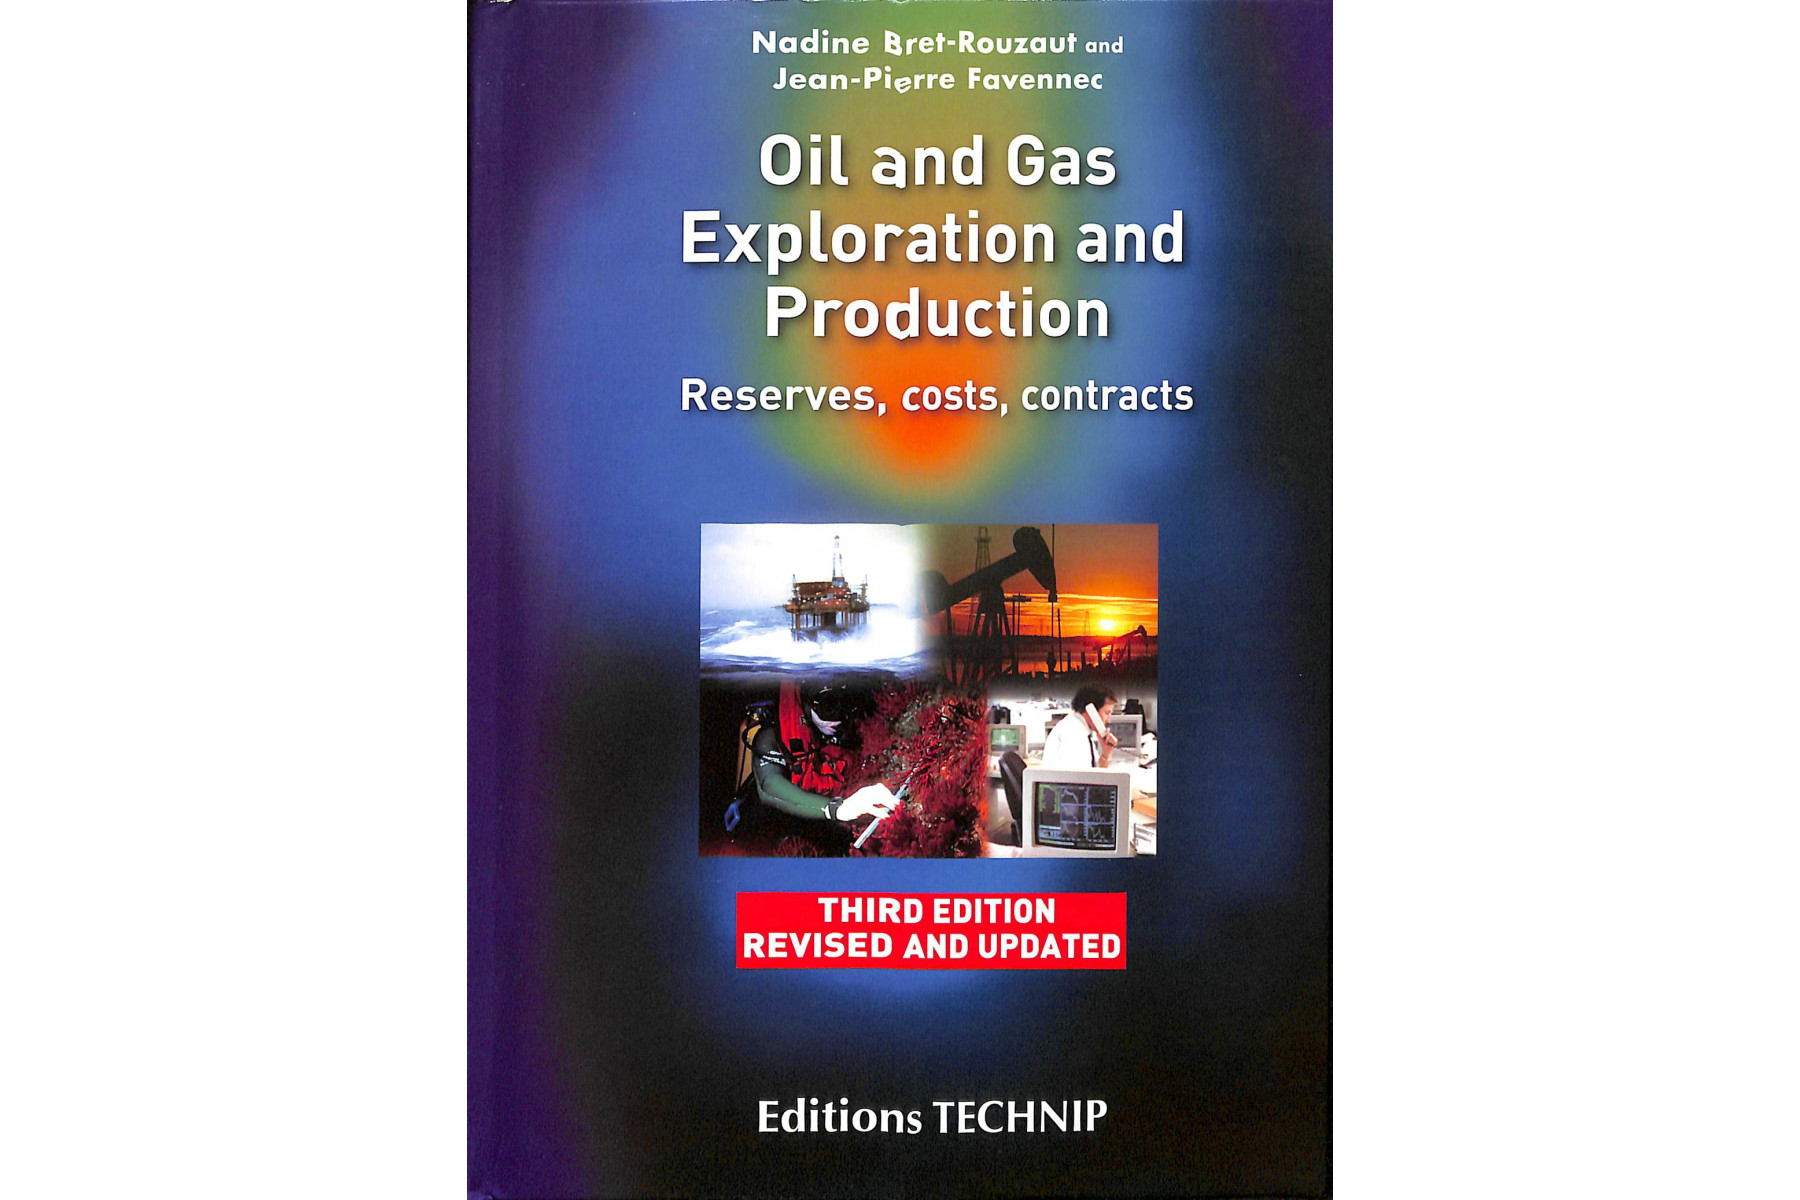 Oil and Gas Exploration and Production: Reserves, Costs, Contracts